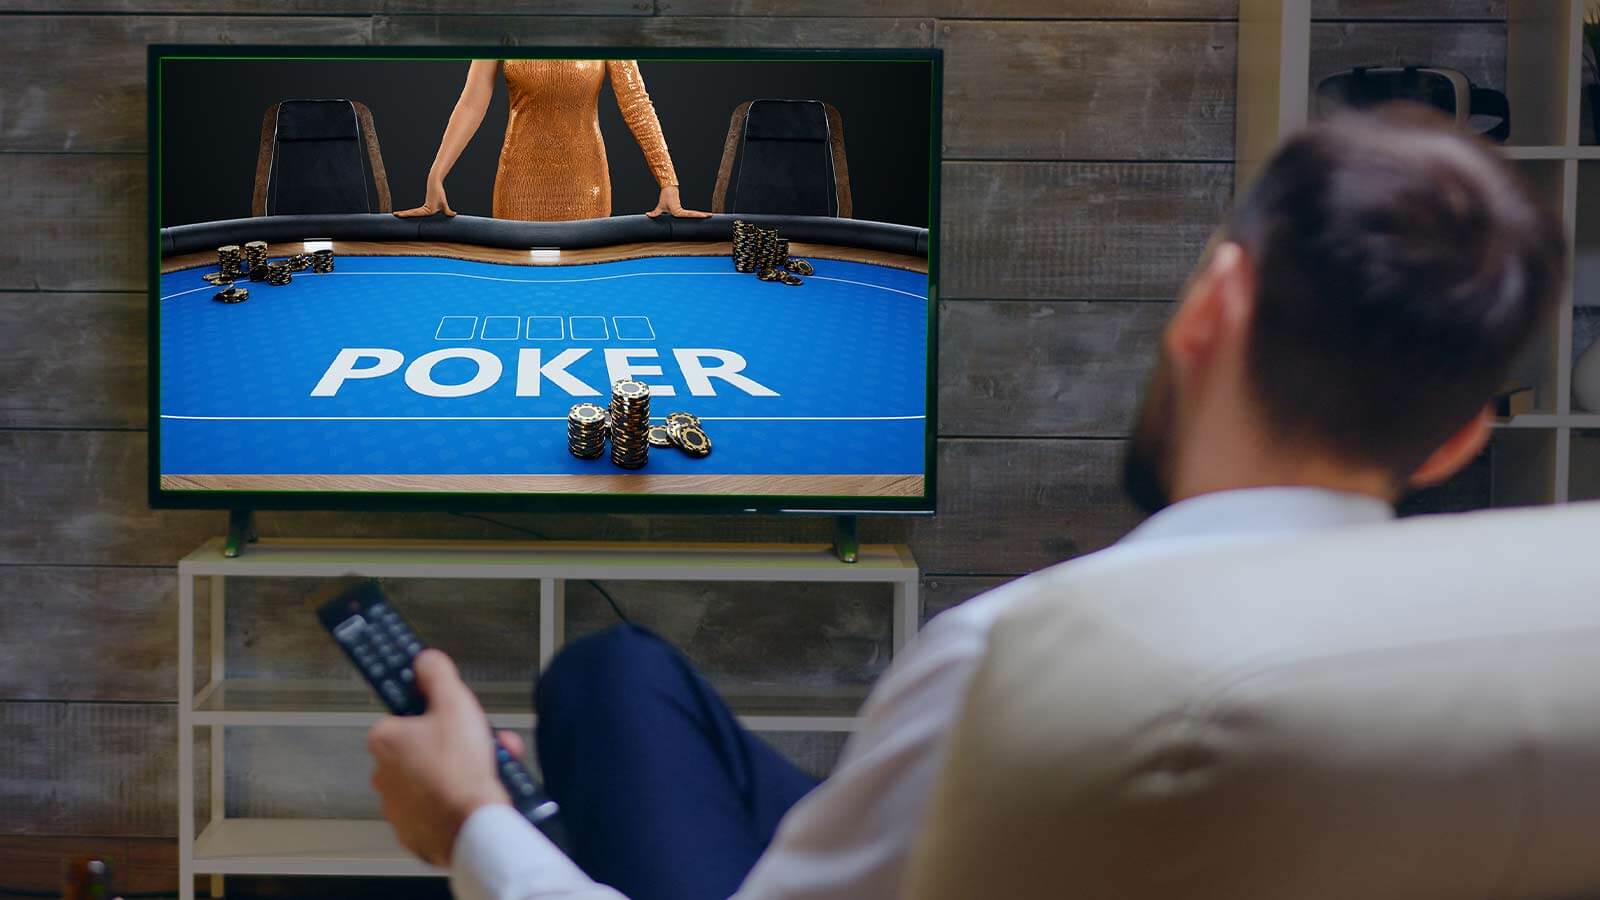 Did you know that television help poker becoming so popular